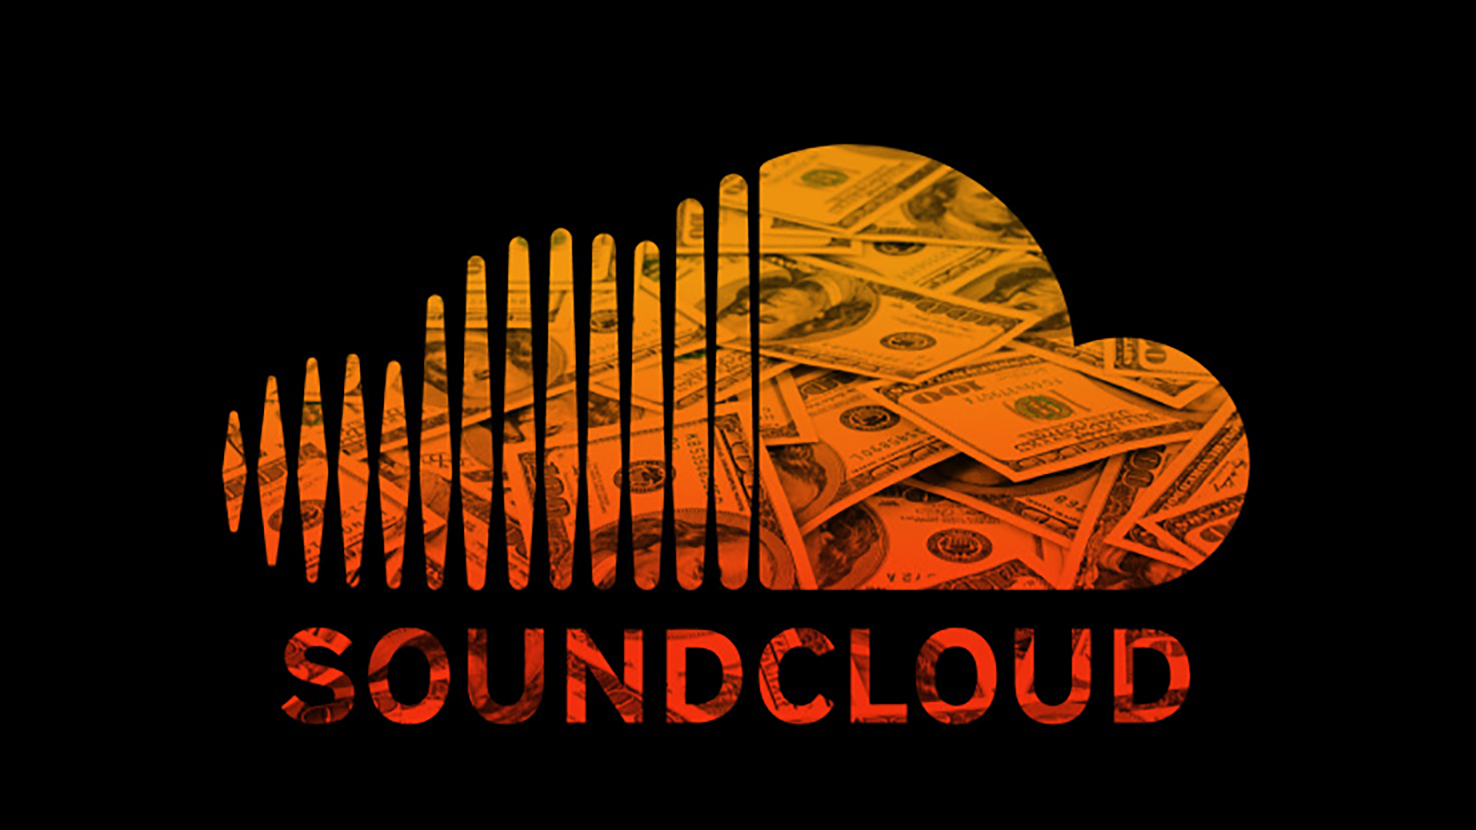 It looks like SoundCloud could be selling majority stakes to 2 different firms